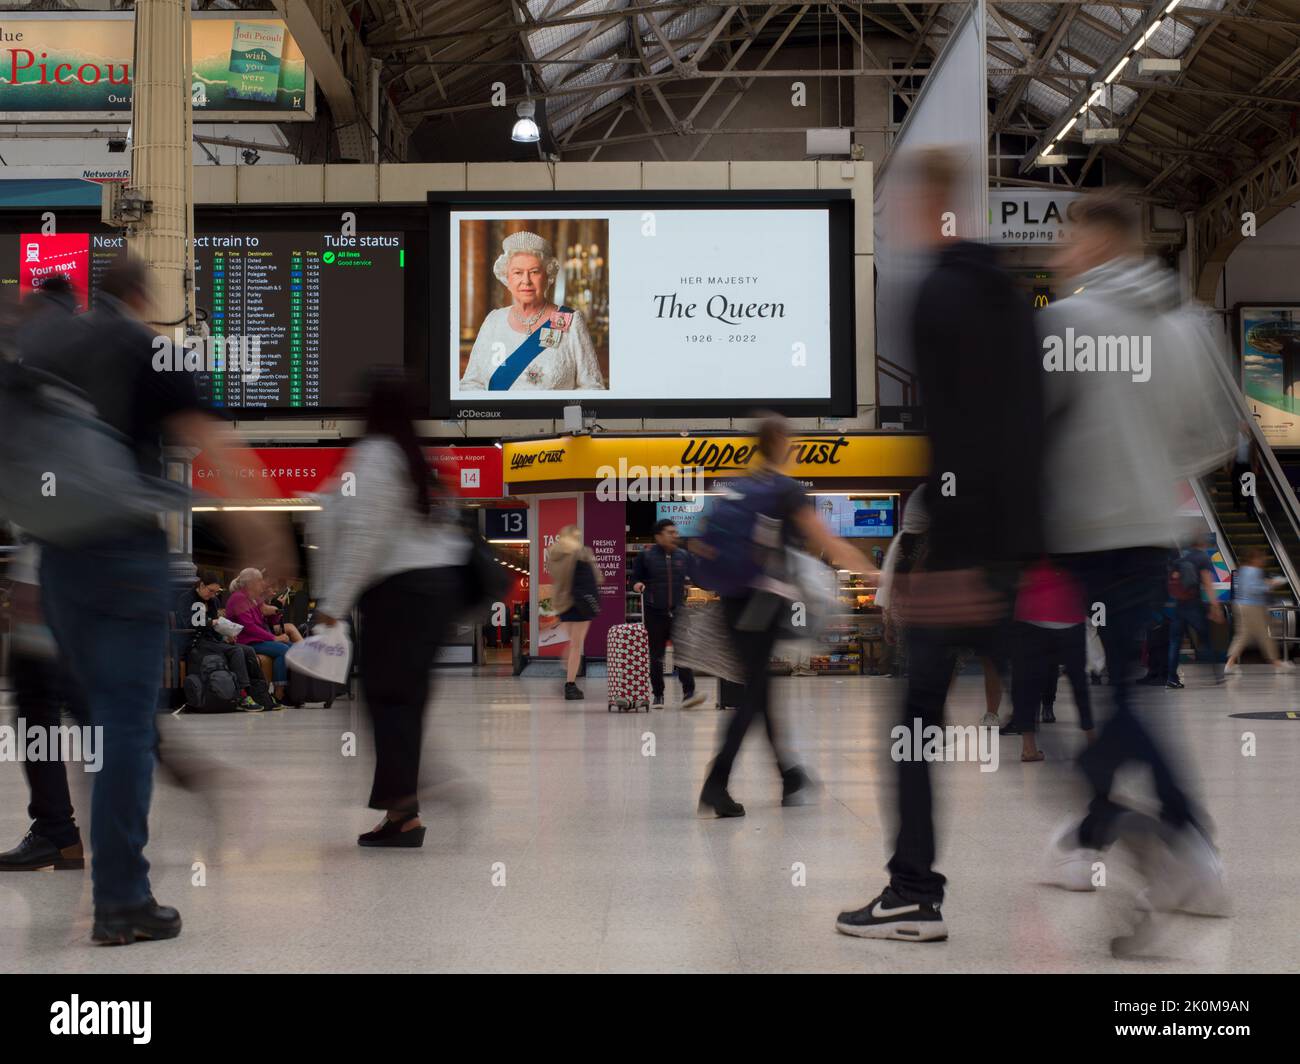 London, UK, 9th September 2022, Shot of Queen Elizabeth II tribute at Victoria Railway Station Stock Photo